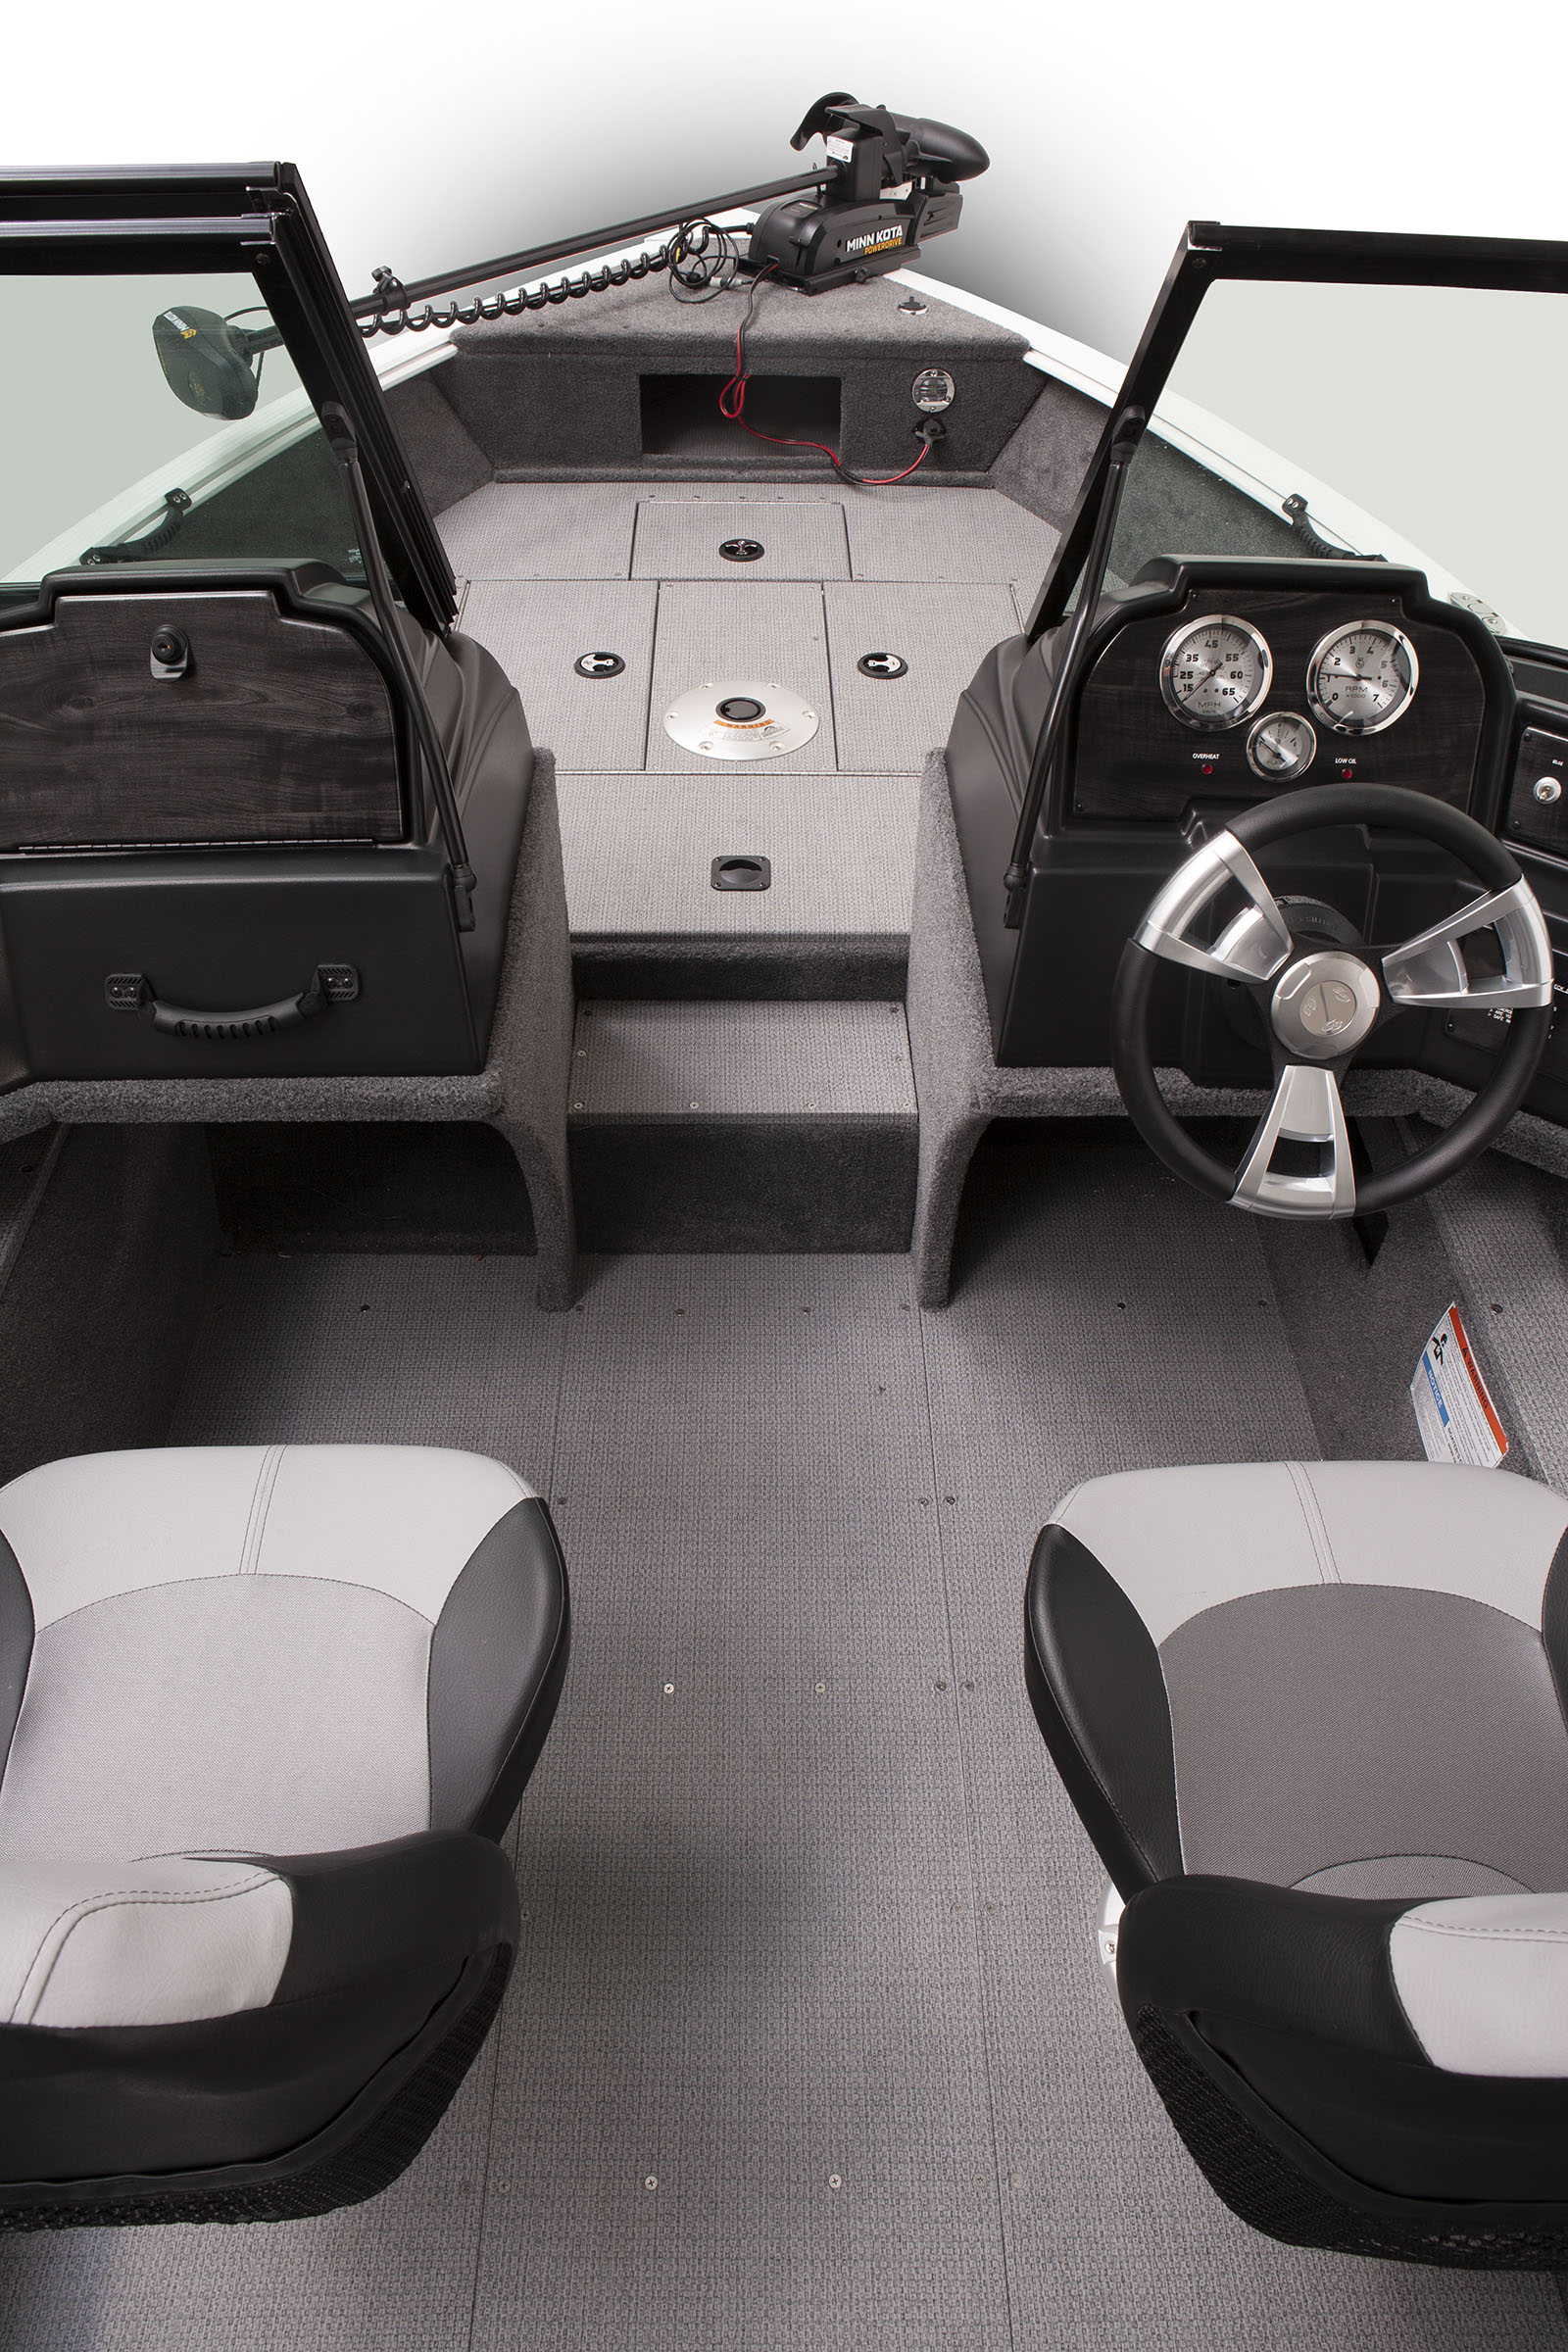 https://www.g3boats.com/wp/wp-content/uploads/2020/08/Sportsman-1610-SS-Front-Storage-scaled.jpg